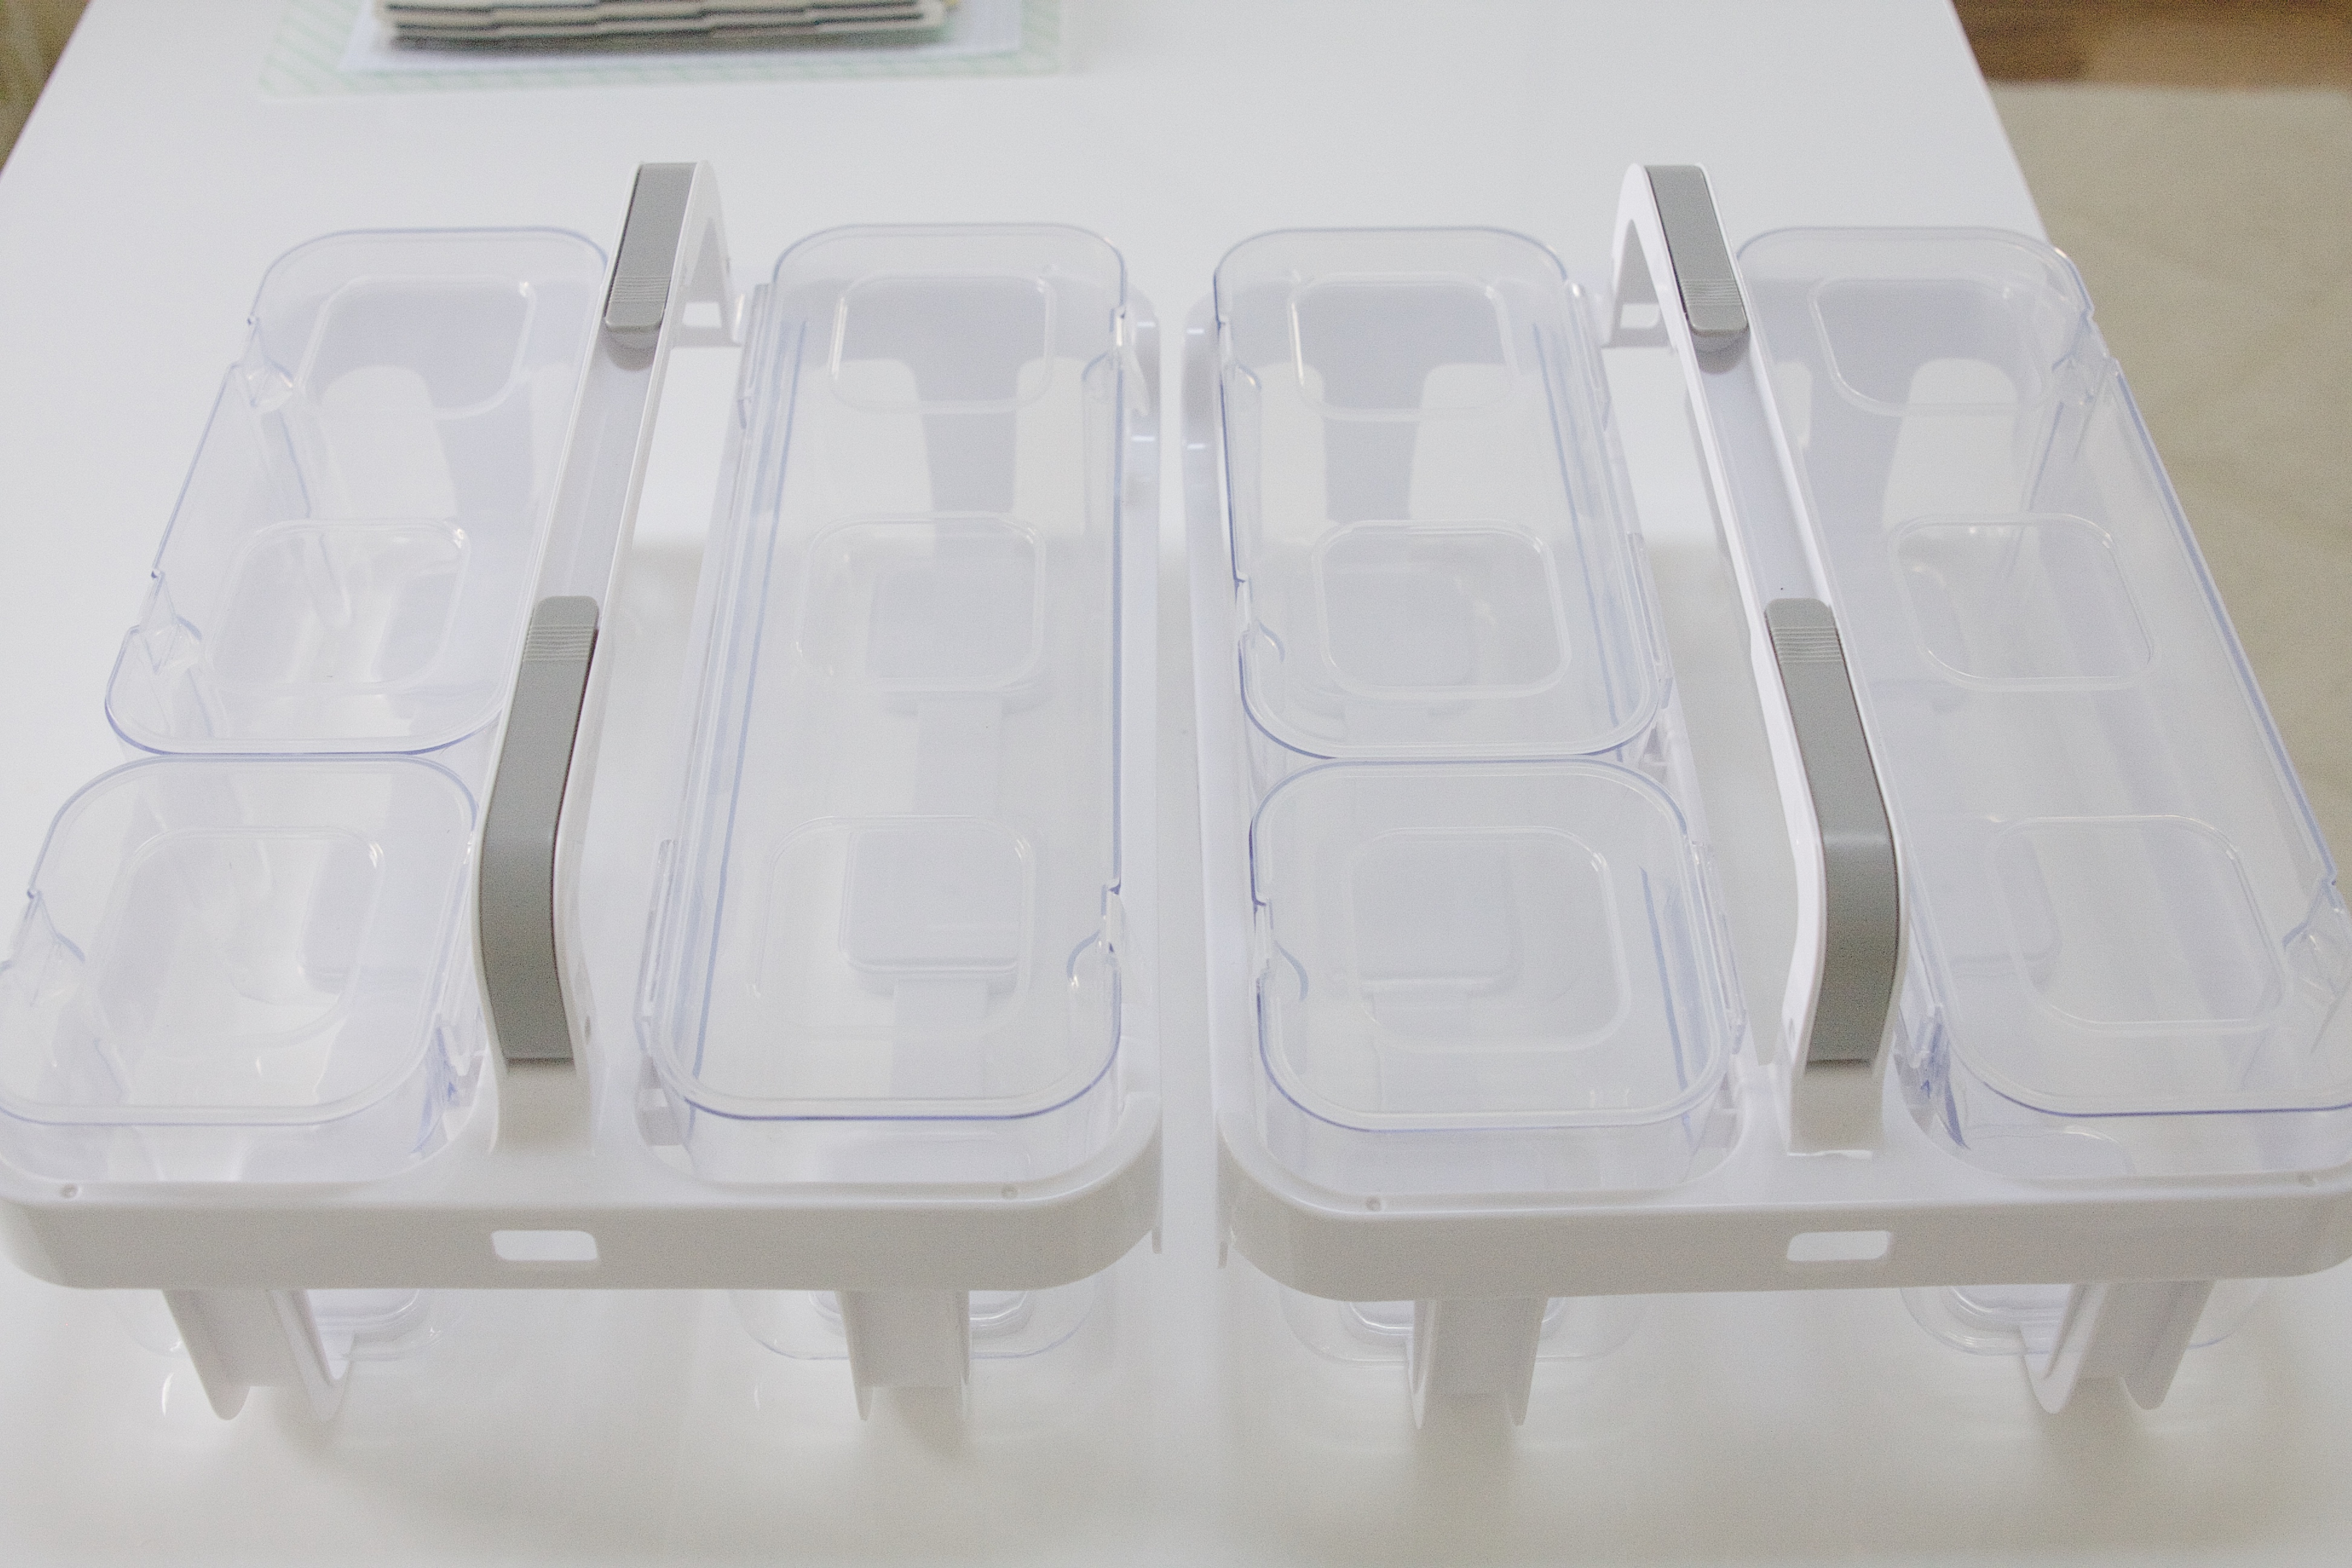 Deflect-O Stackable Plastic Caddy Organizer System